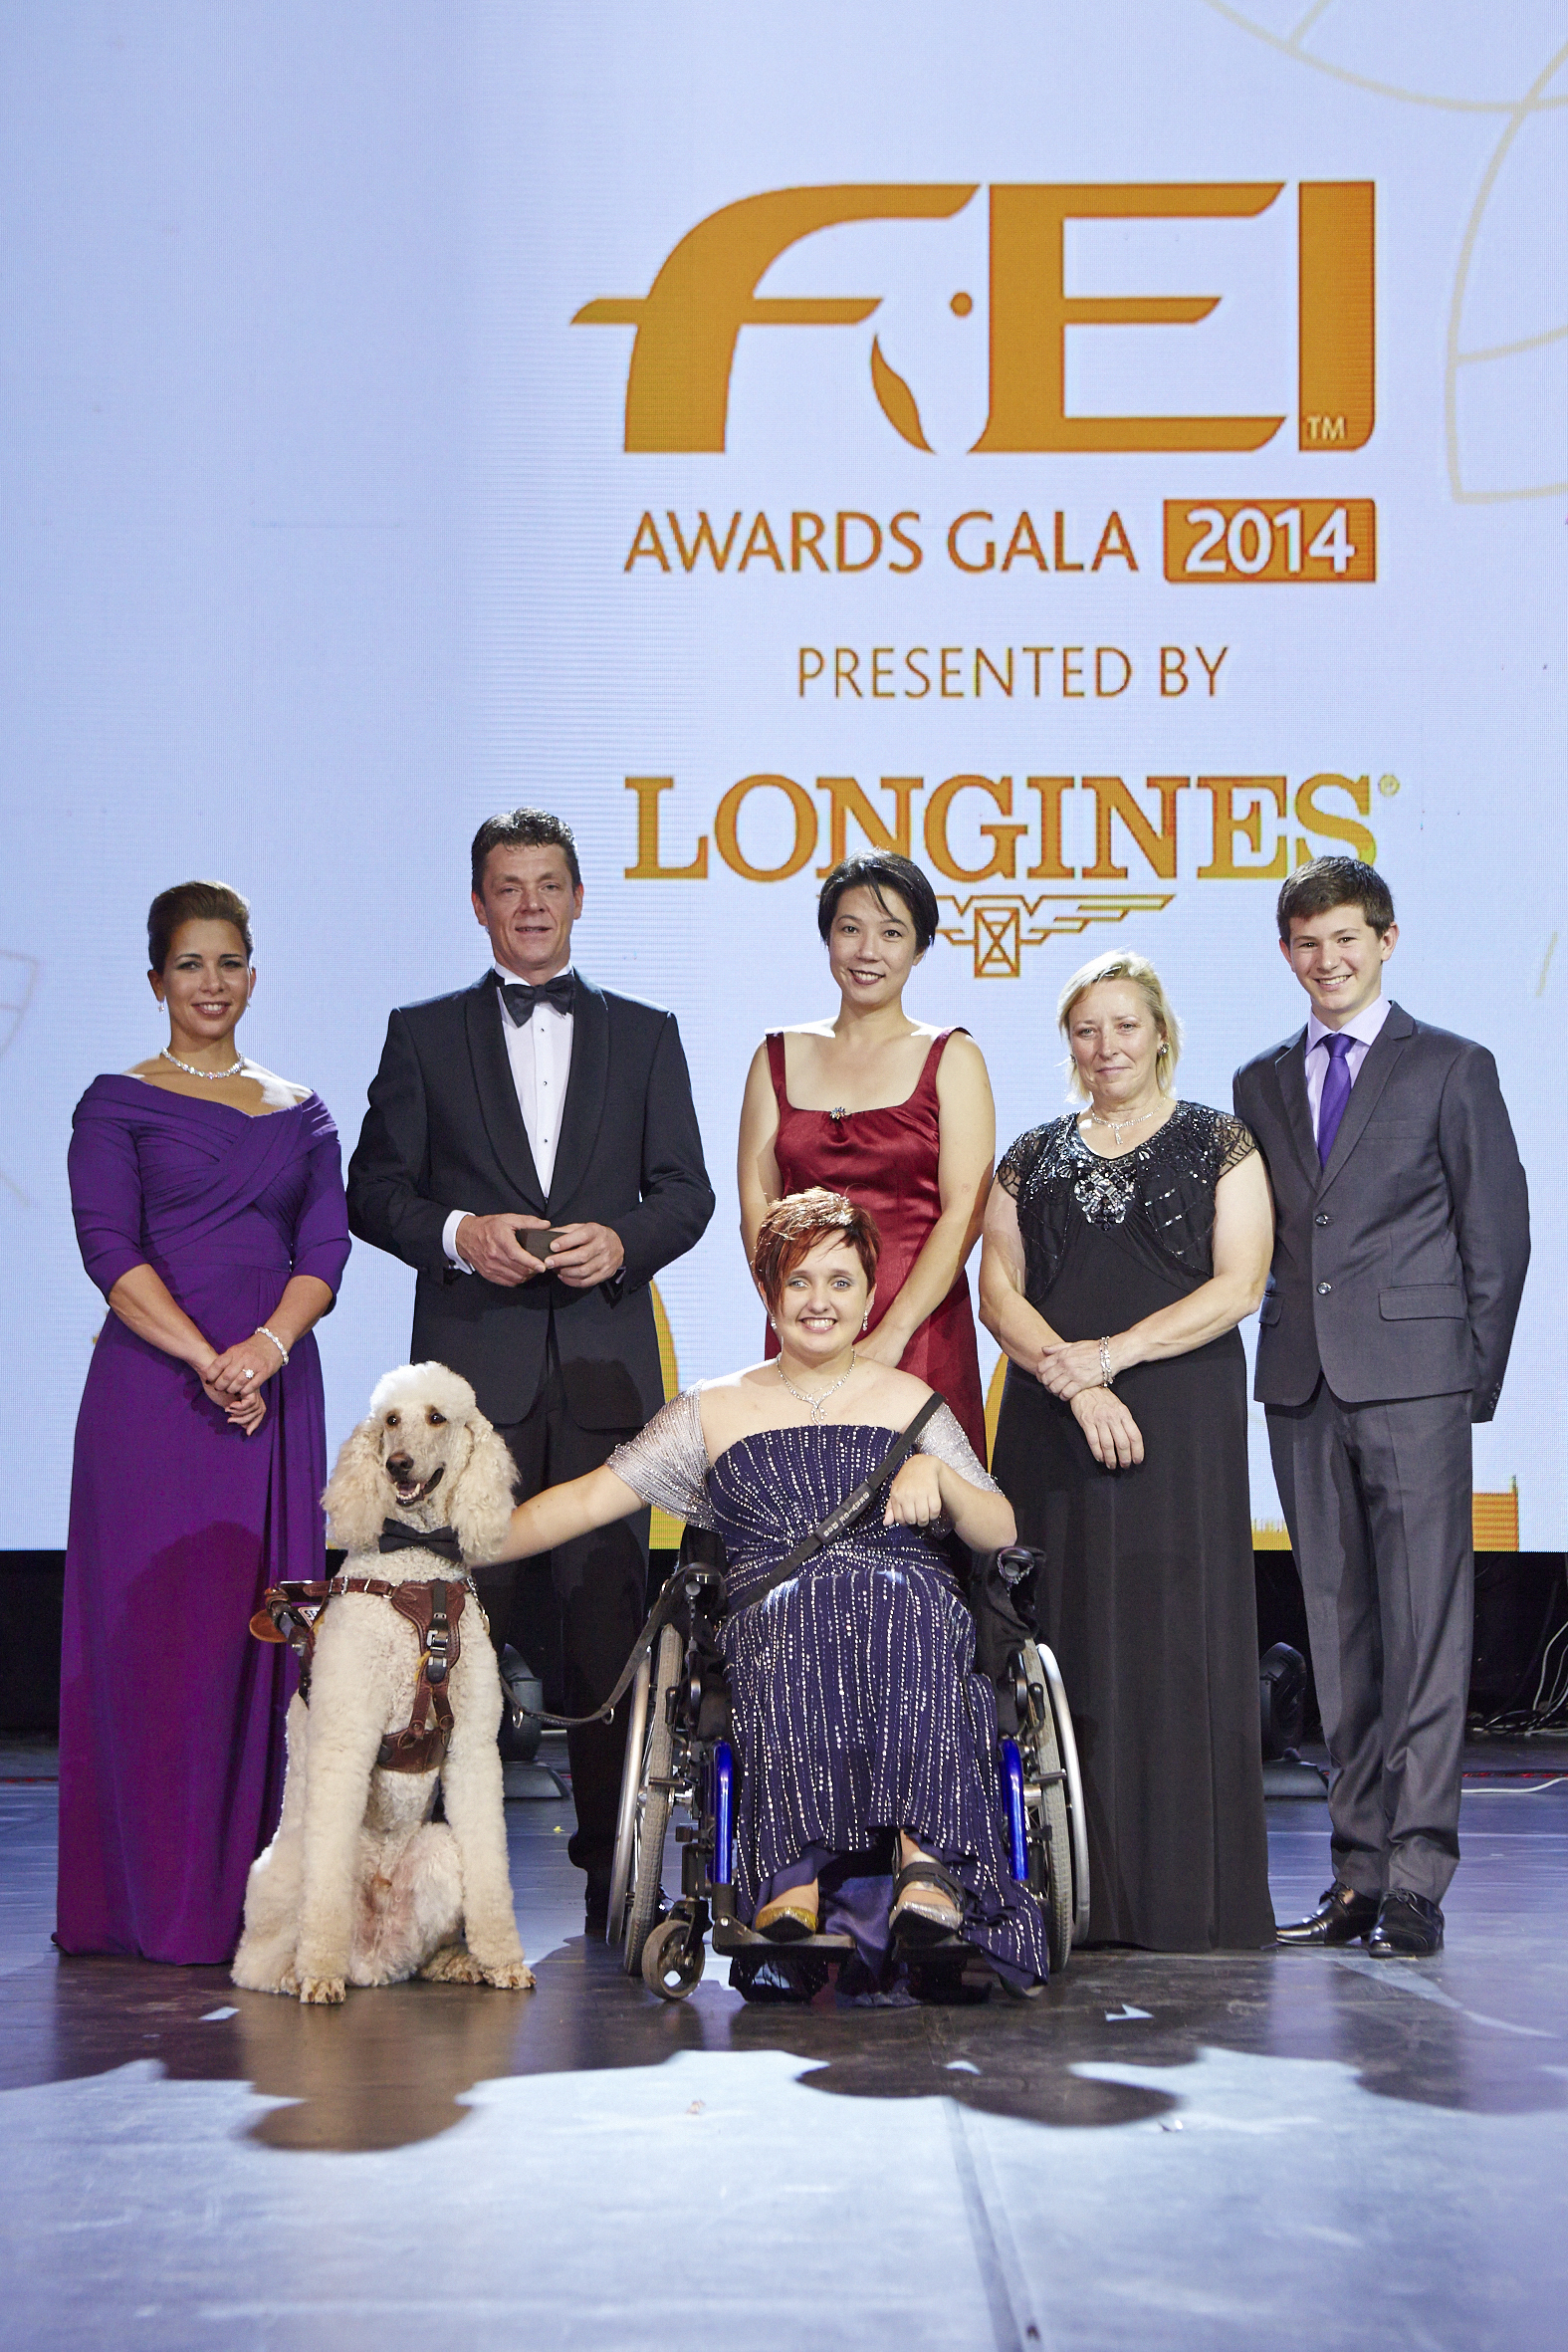 Equestrian heroes were celebrated tonight at the glittering FEI Awards 2014, the “Oscars of the equestrian world”, presented by Longines in Baku’s fabulous Buta Palace (FEI/Liz Gregg)